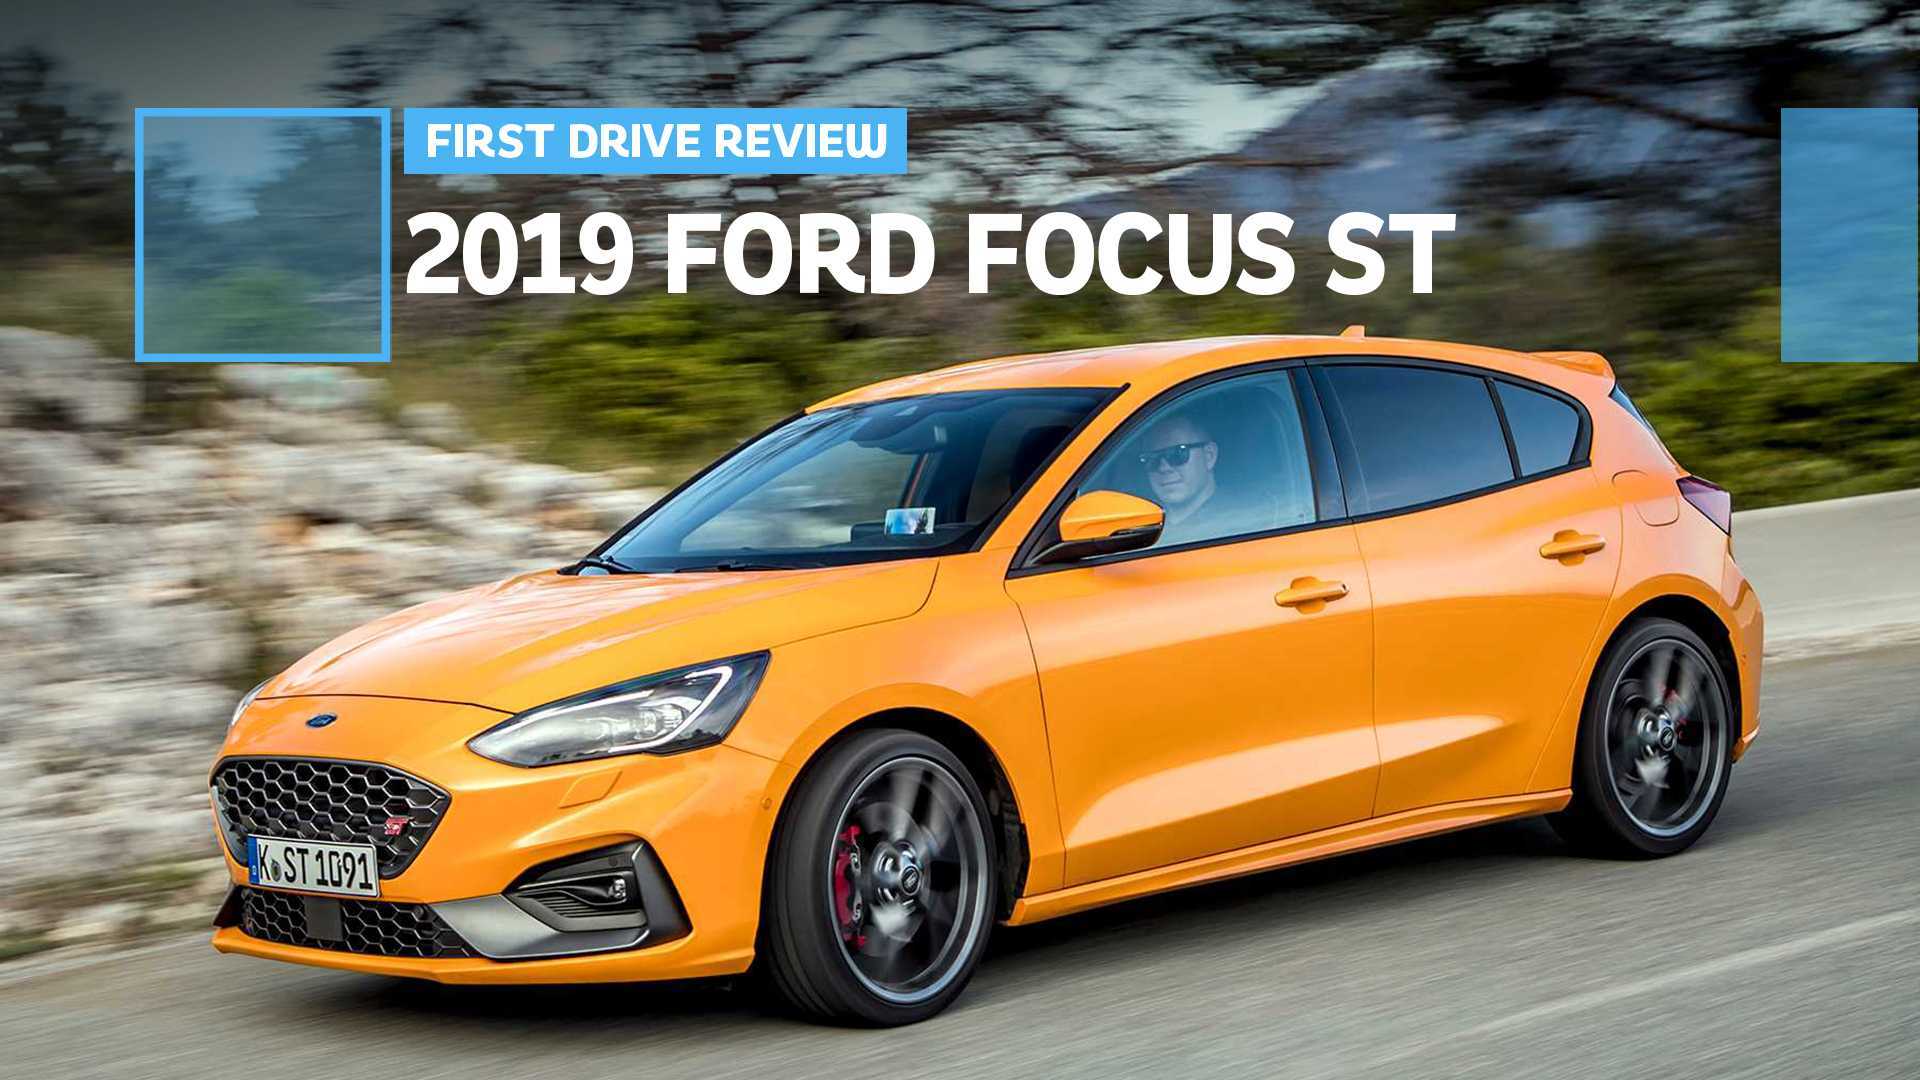 2019 Ford Focus ST First Drive: Another Energetic ST